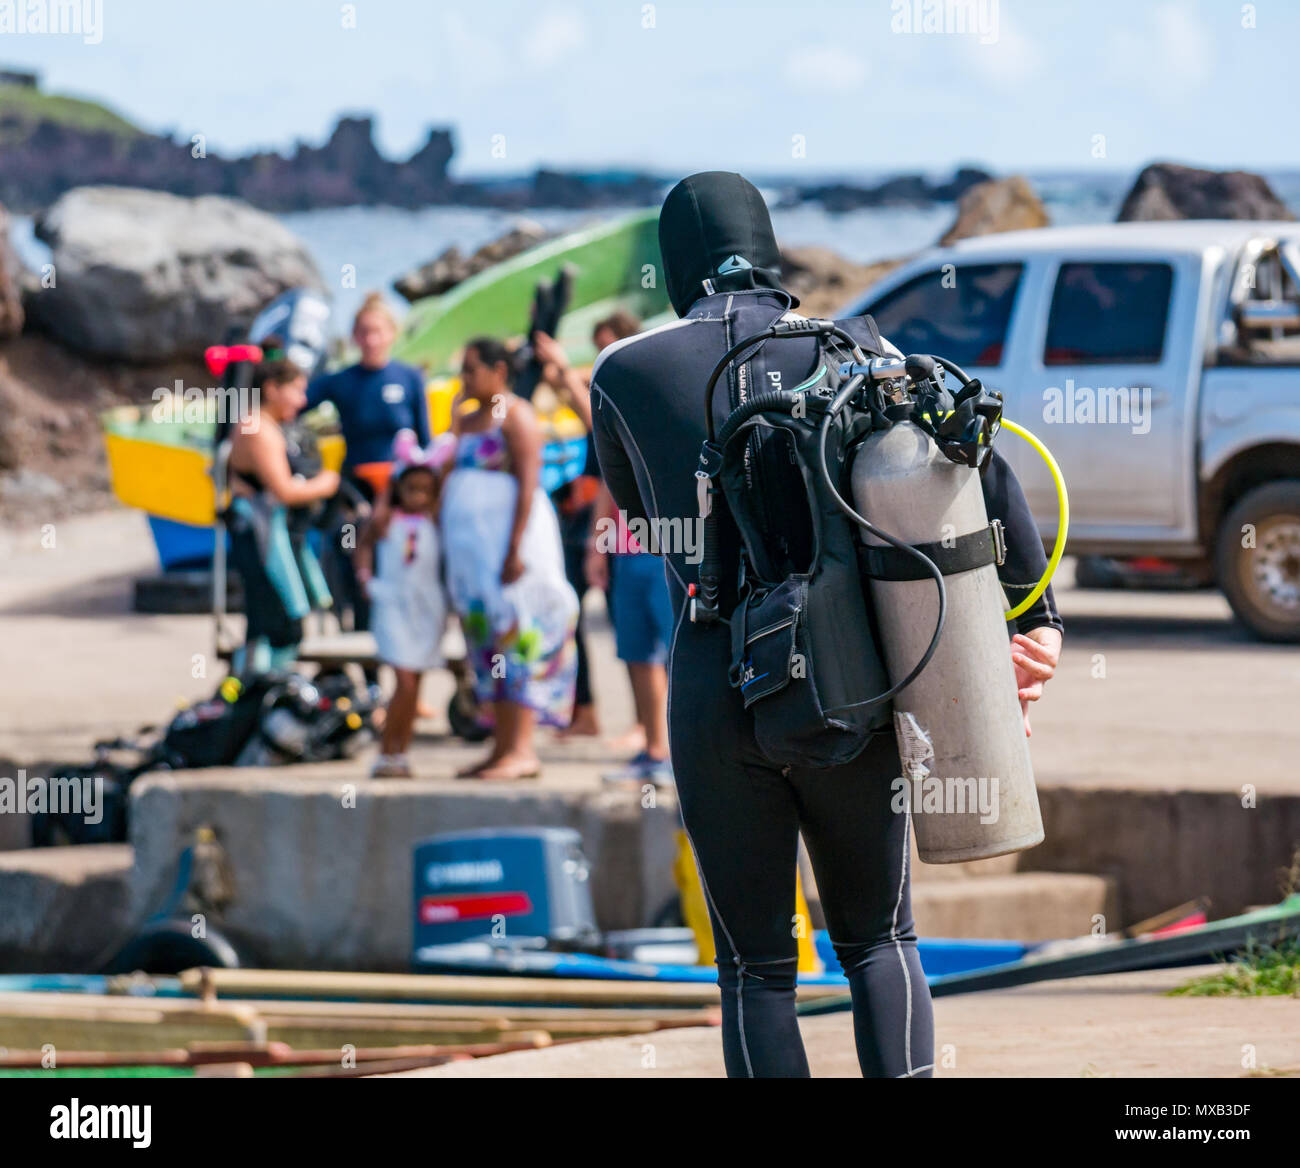 Man in wetsuit carrying scuba oxygen tank and diving gear walking to boat in harbour with local people on quayside, Hanga Roa, Easter Island, Chile Stock Photo